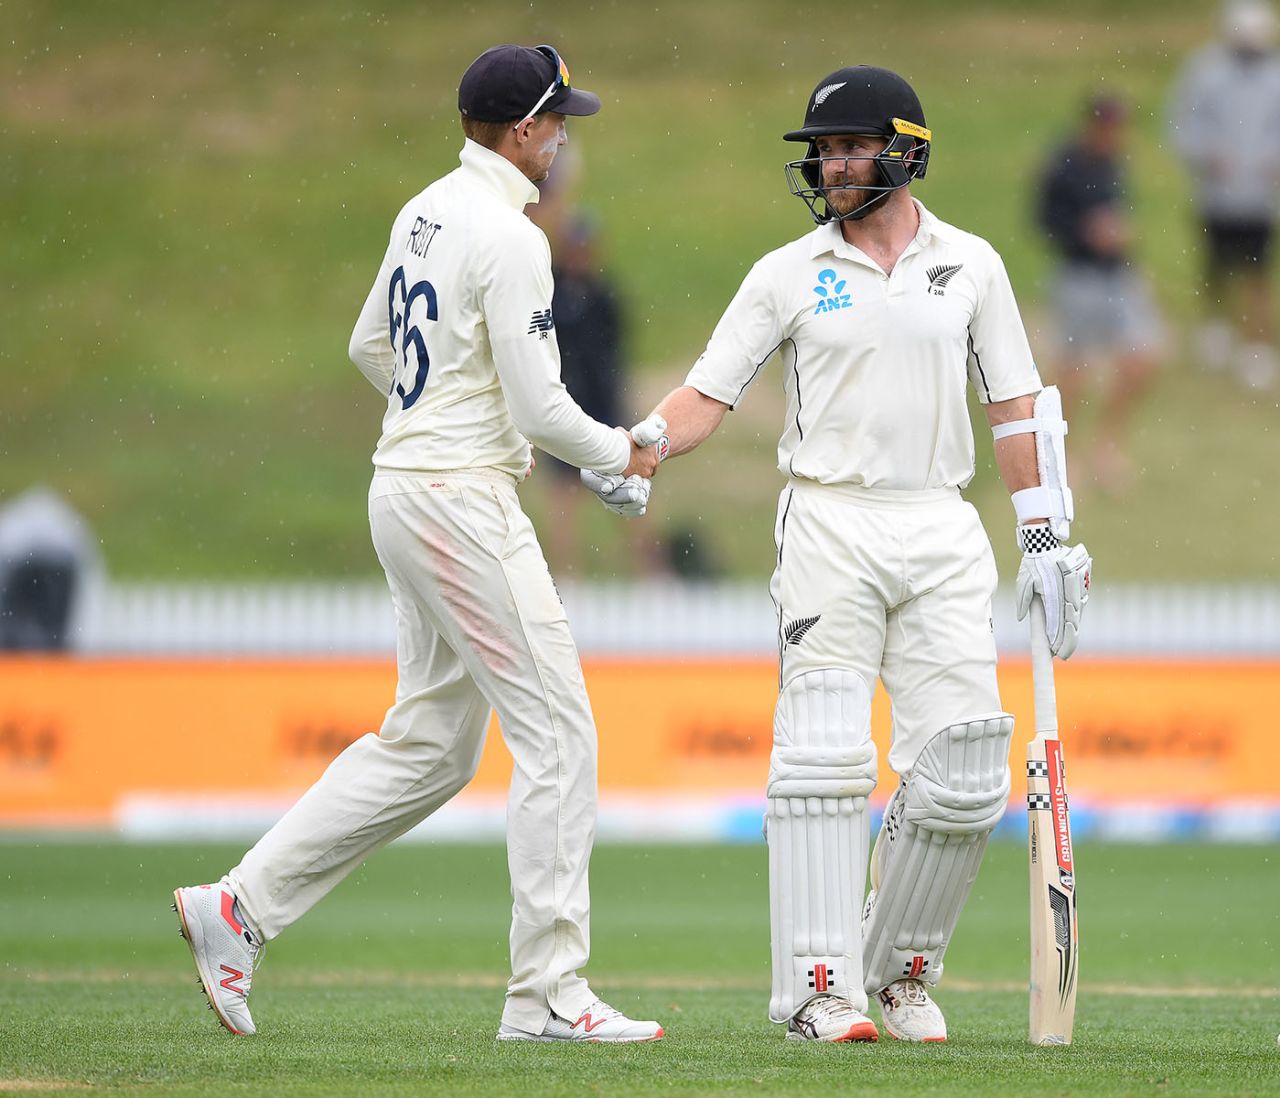 Joe Root shakes hands with Kane Williamson as rain stops play on day 5, New Zealand v England, 2nd Test, Hamilton, December 03, 2019